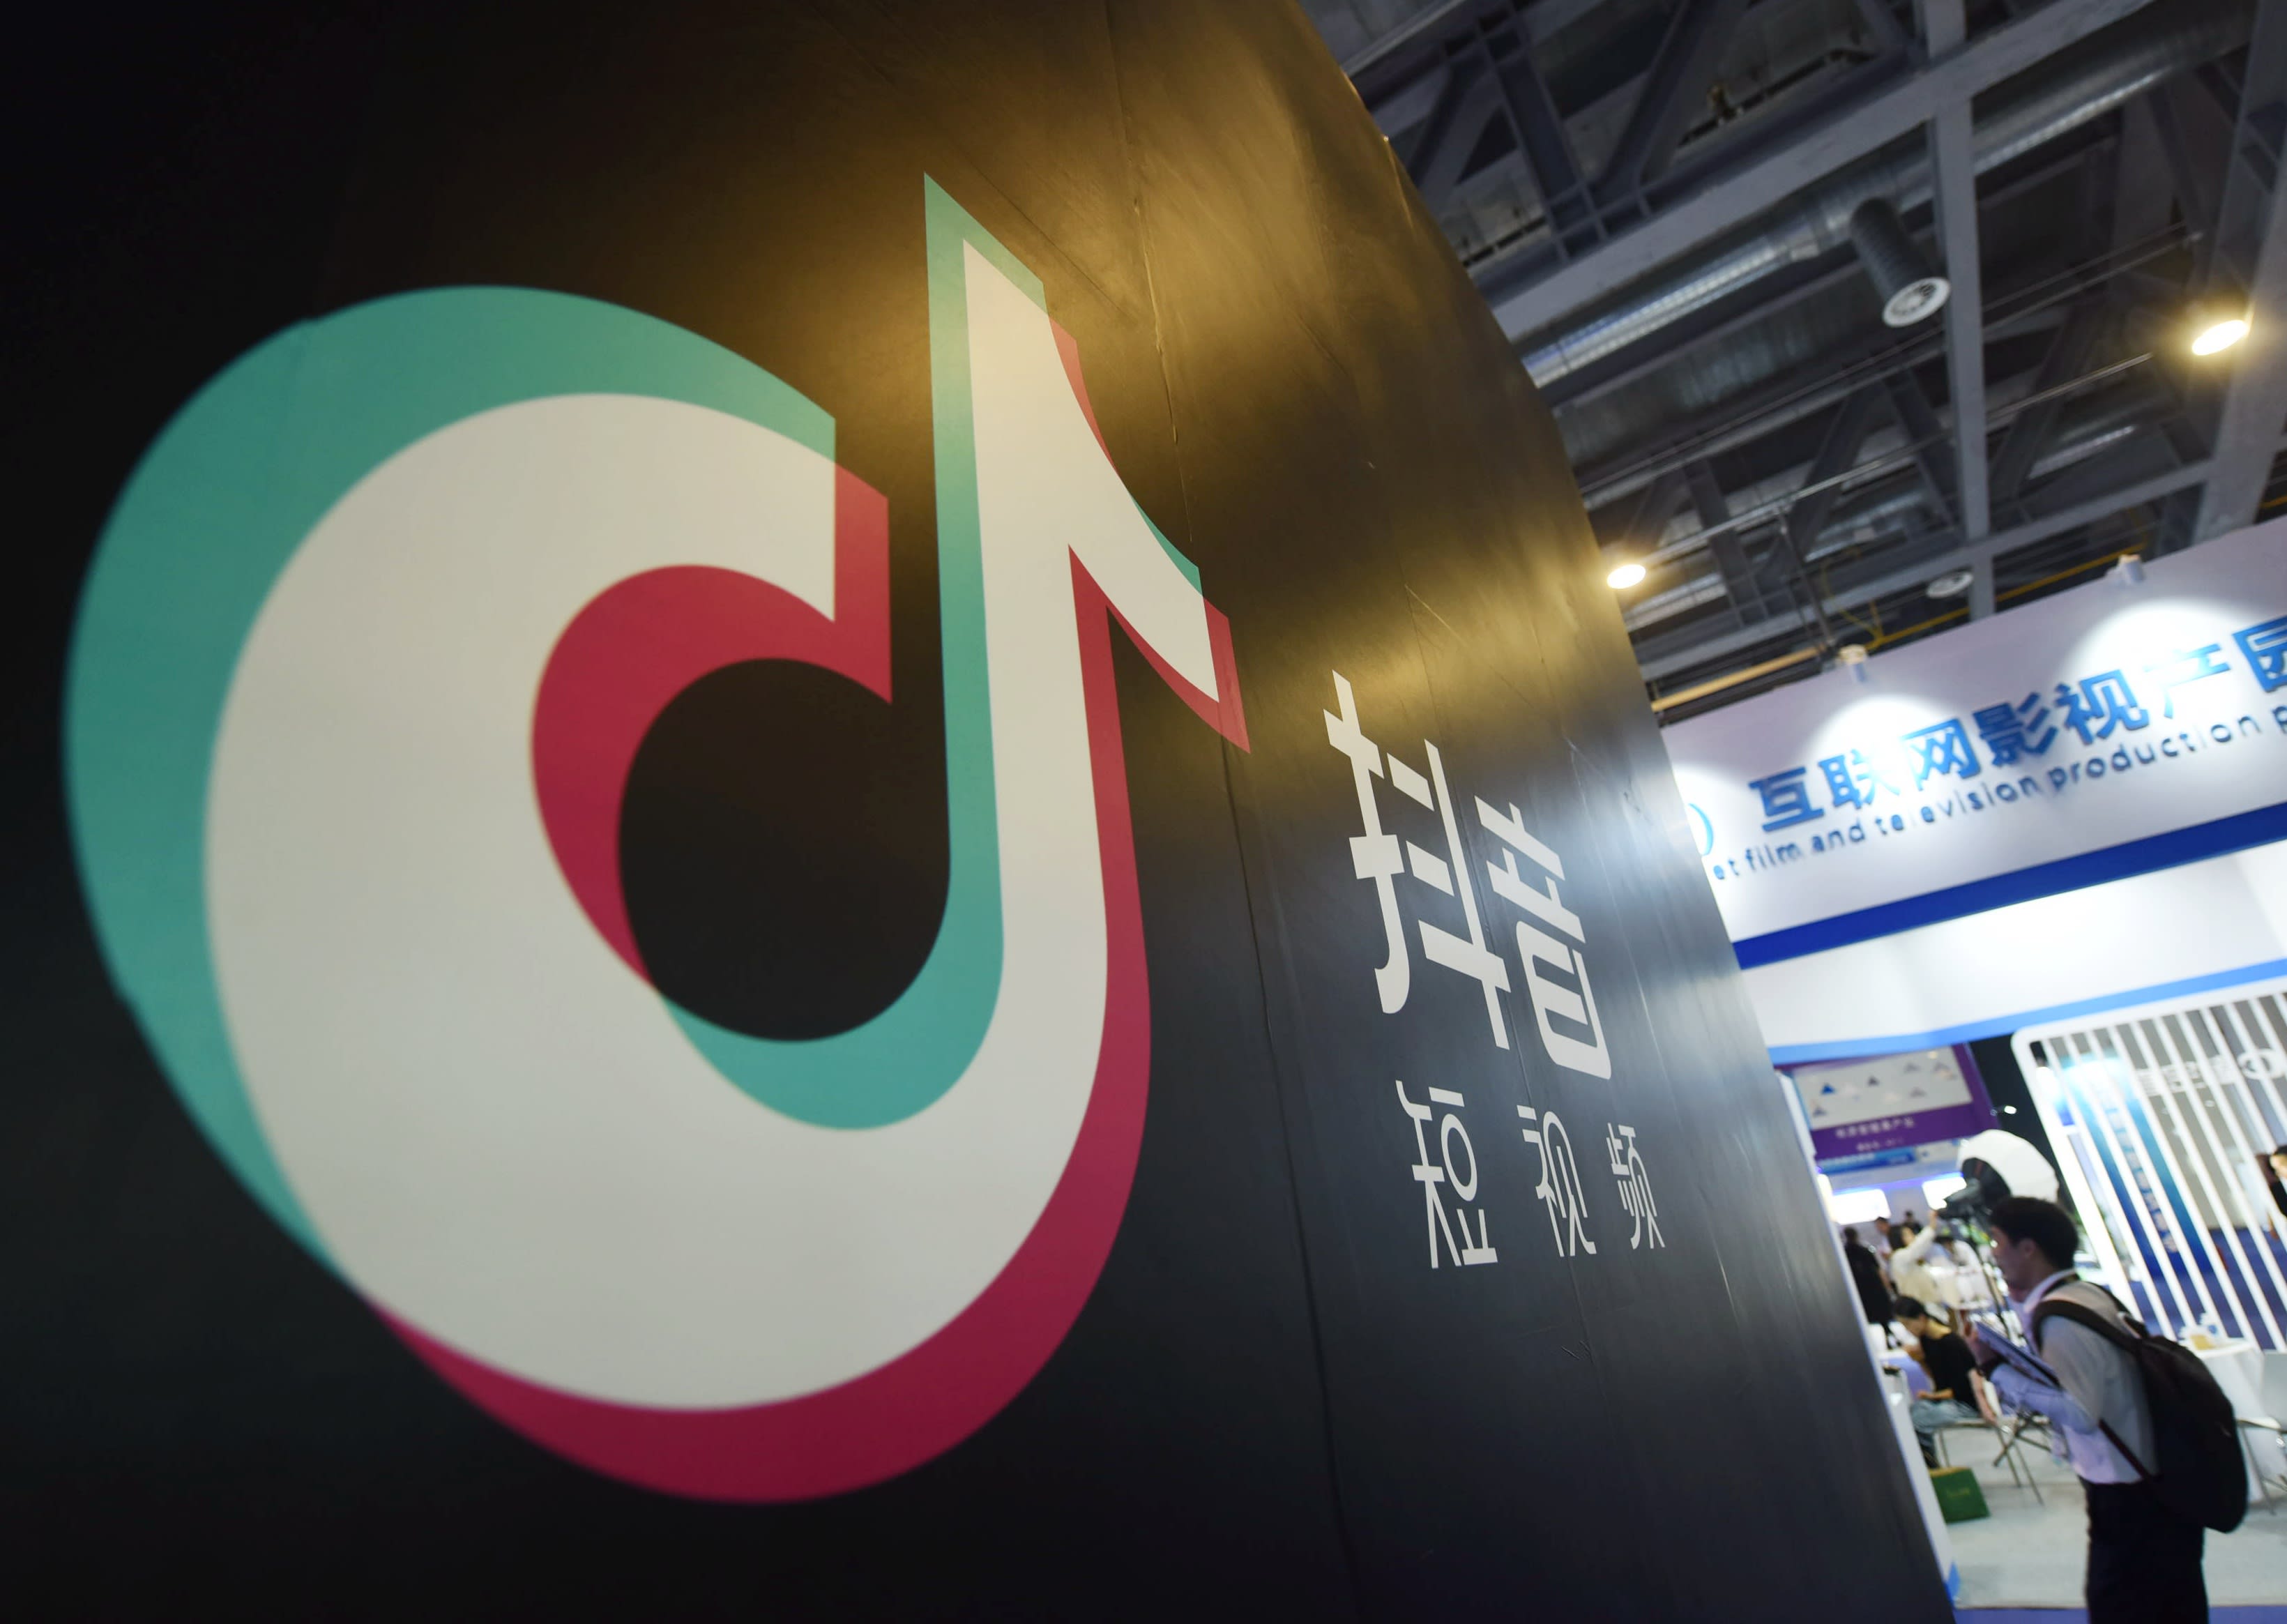 As user's account is suspended after viral China post, TikTok exec says there's no censorship